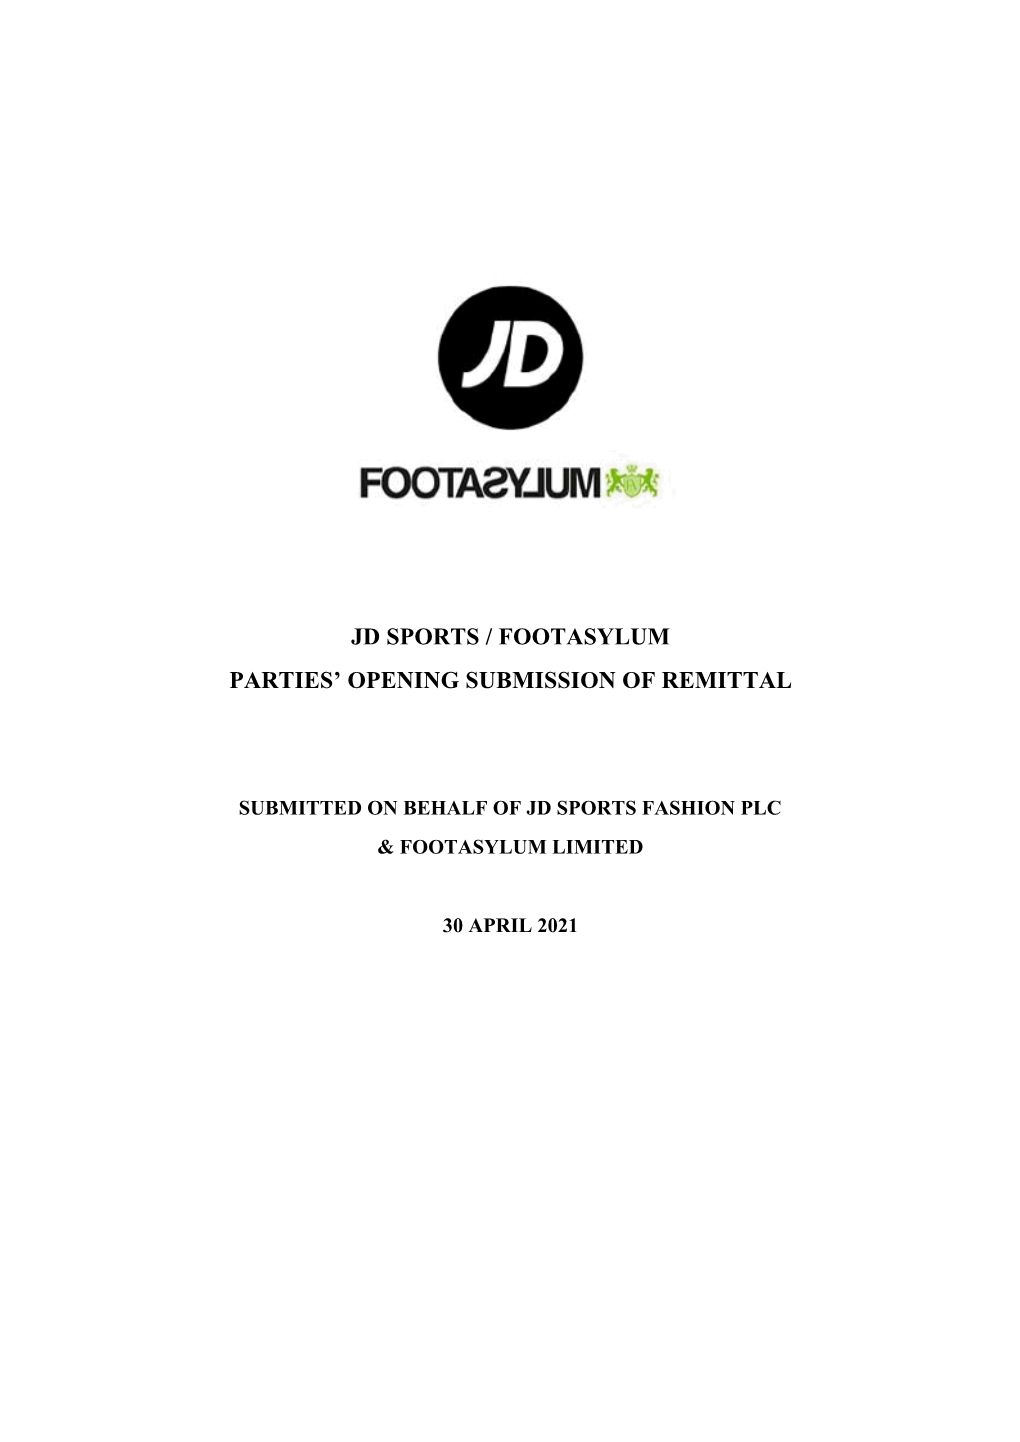 Jd Sports / Footasylum Parties' Opening Submission